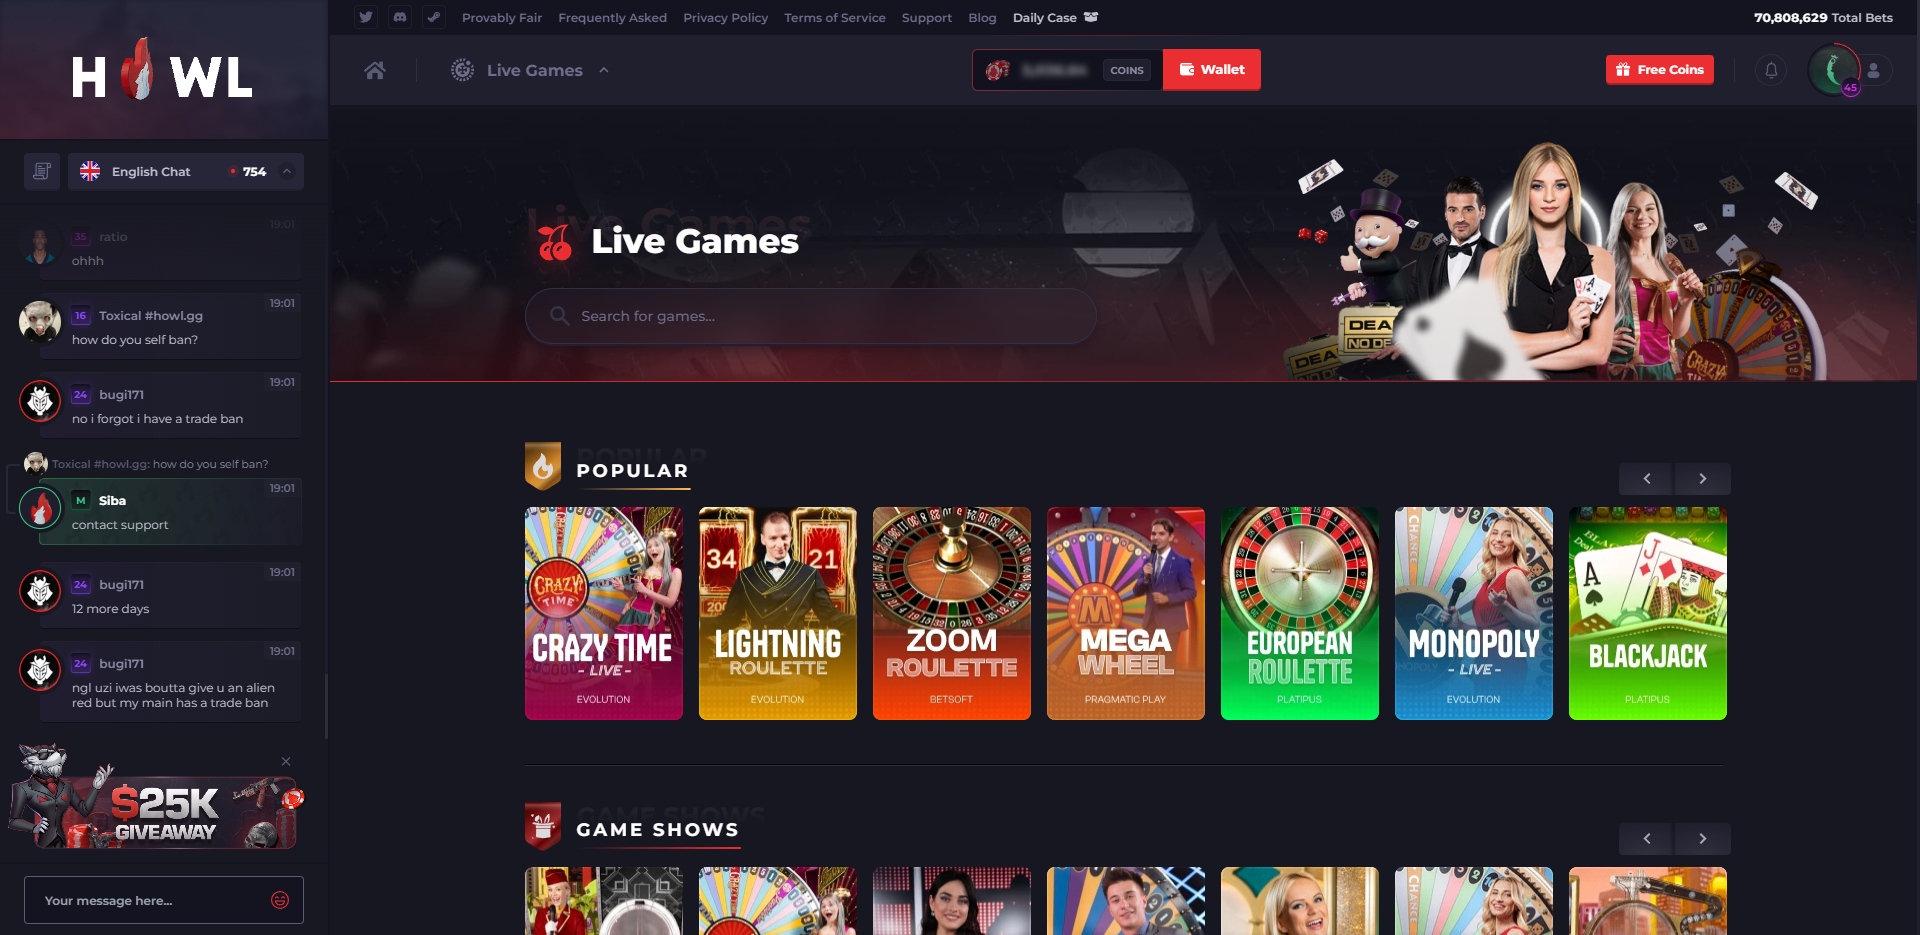 HowlGG Live Games Overview